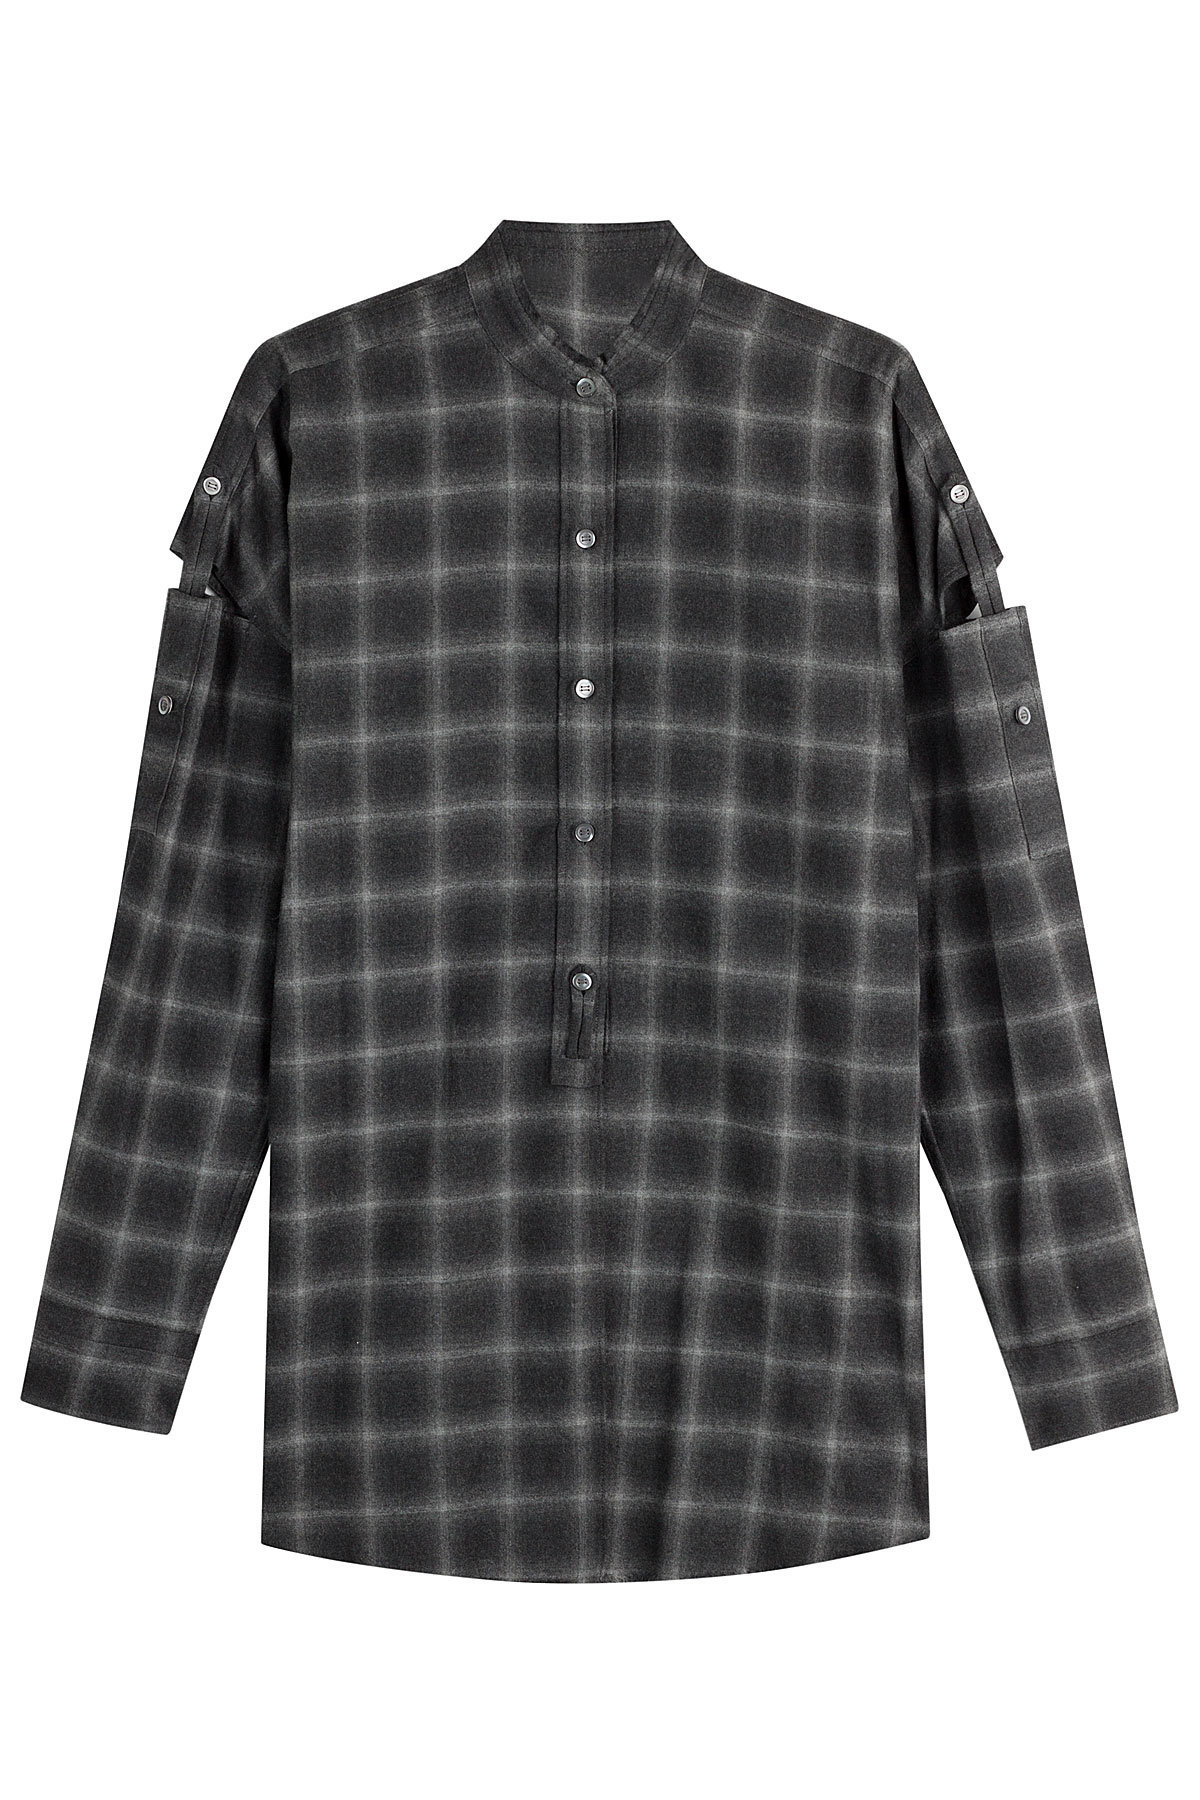 Helmut Lang - Wool Shirt with Cut-Out Detail on Sleeves